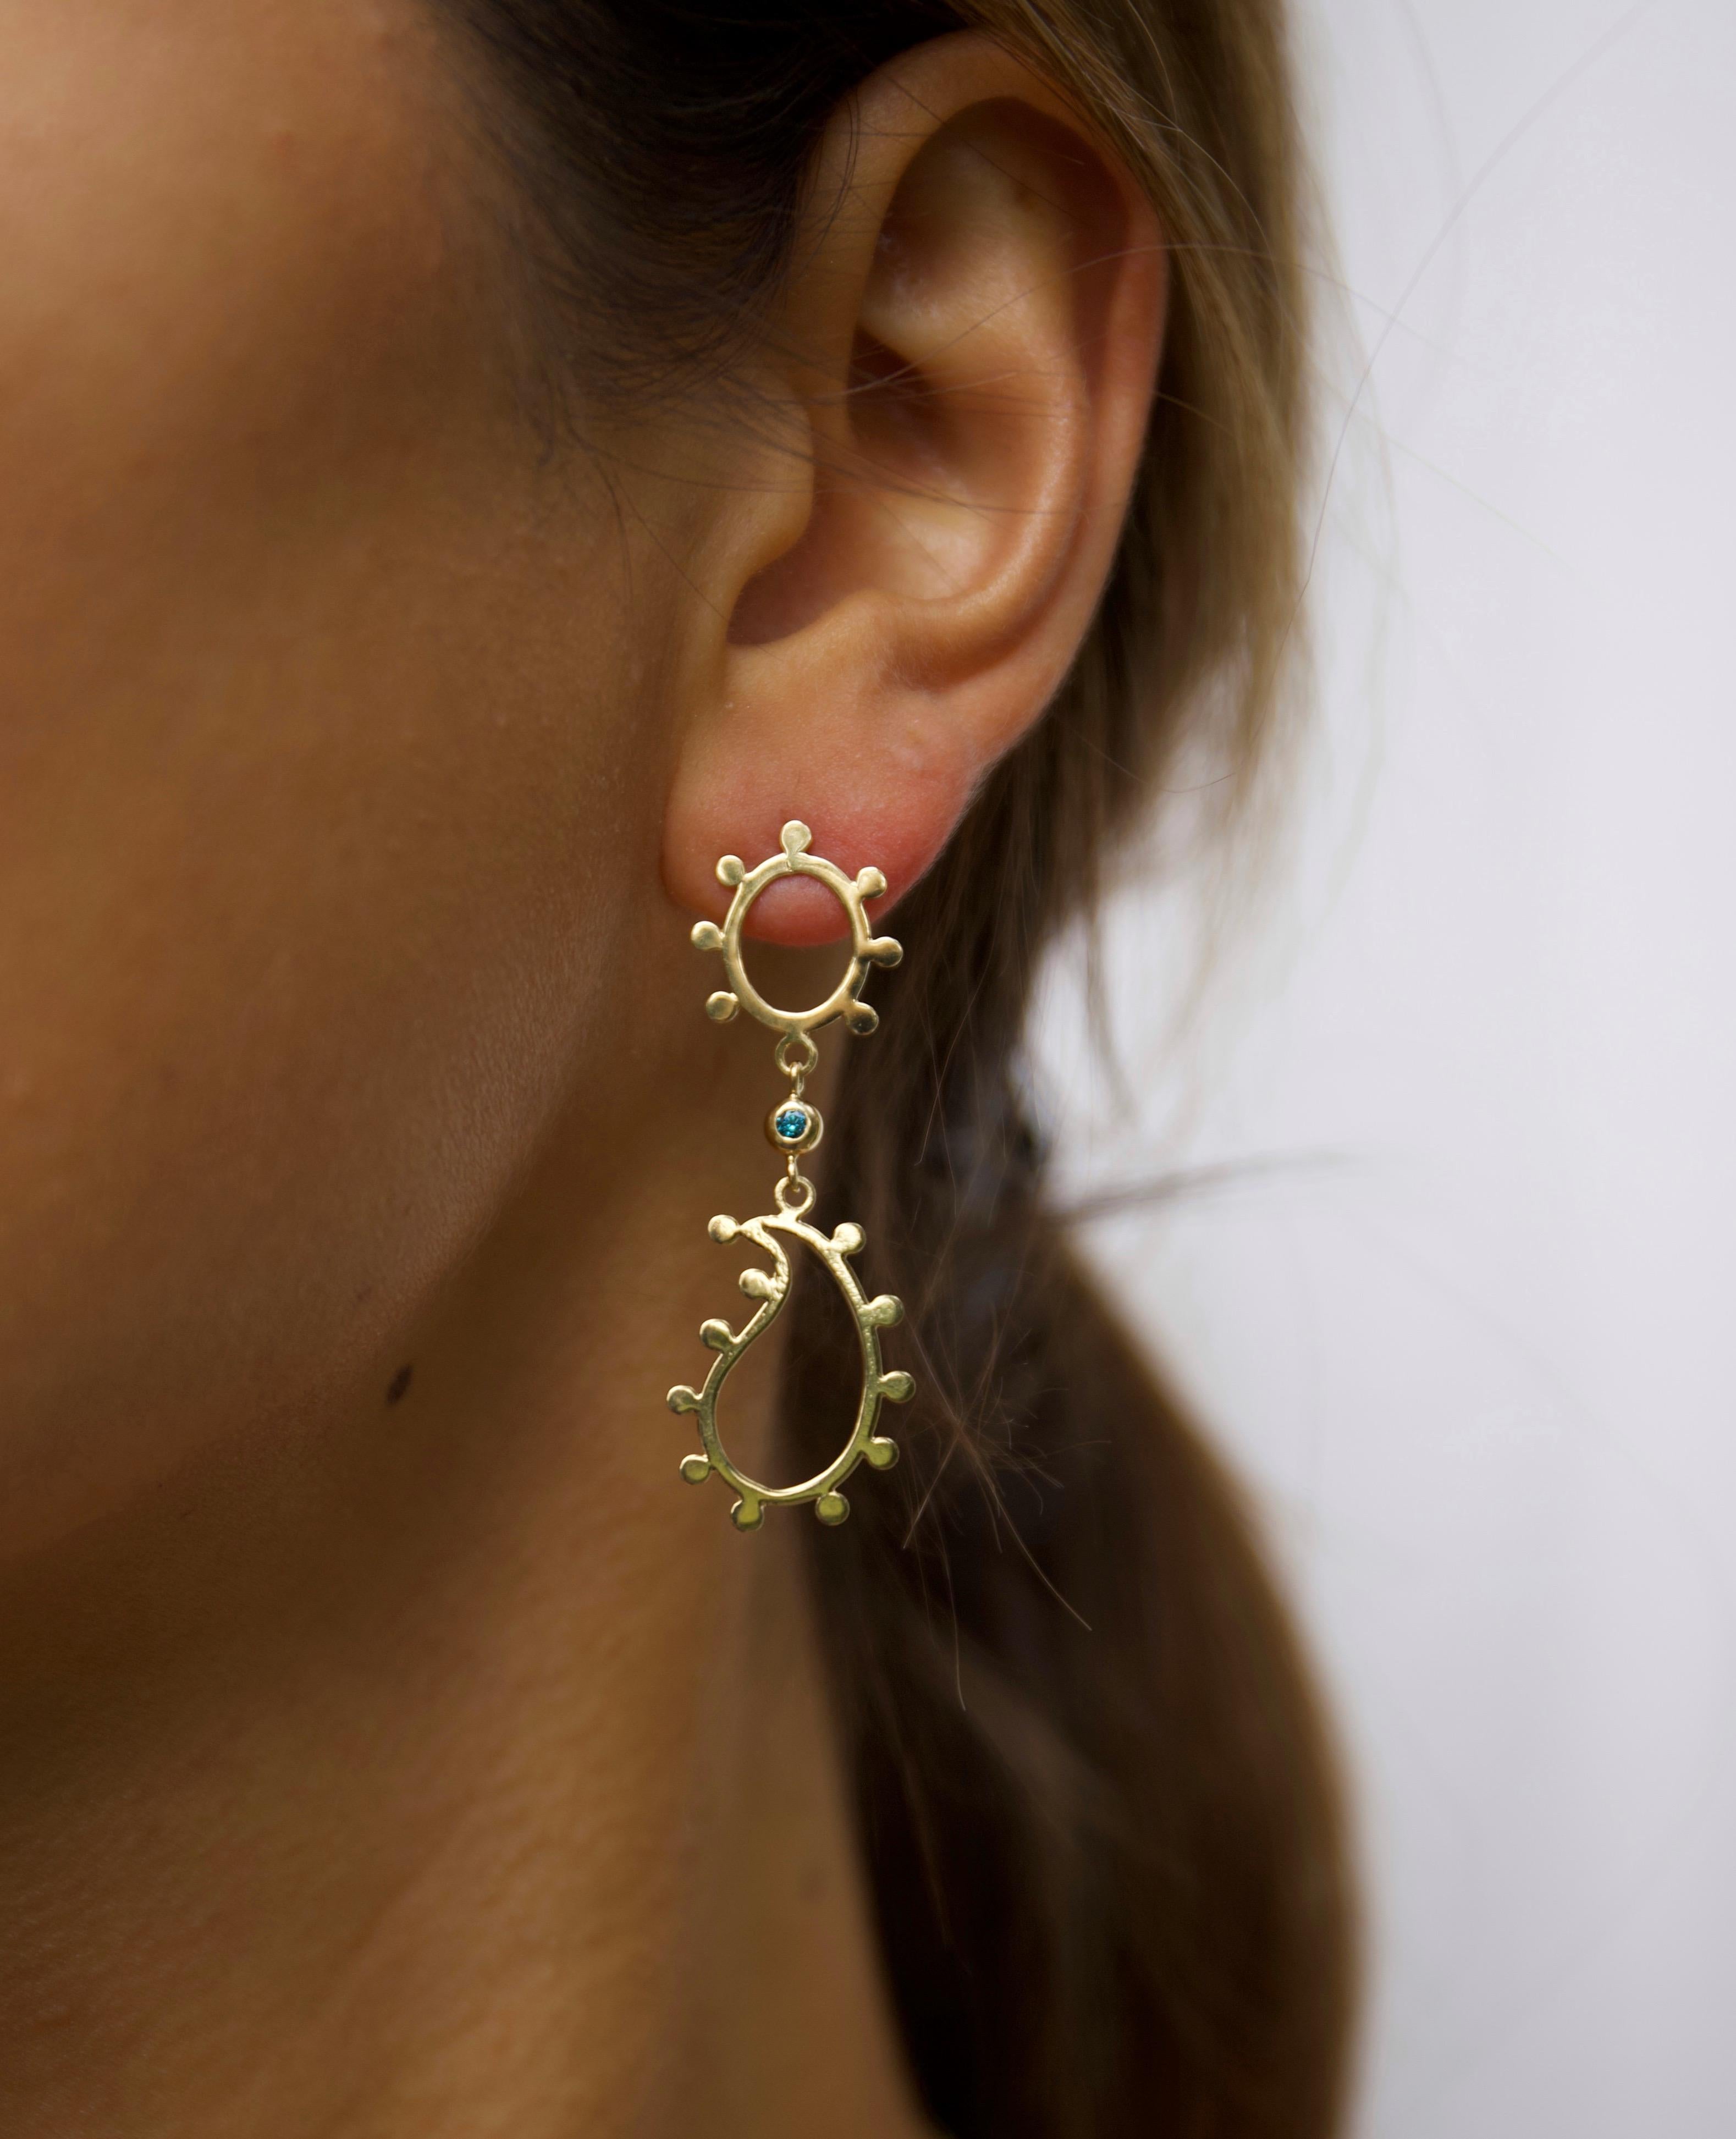 18K gold dangle paisley earrings with an Art Nouveau kind of vibe. The playful and lightweight gold earrings are a timeless addition to your jewelry wardrobe and transition easily from day to night. 
A very versatile piece of jewelry, and the small,